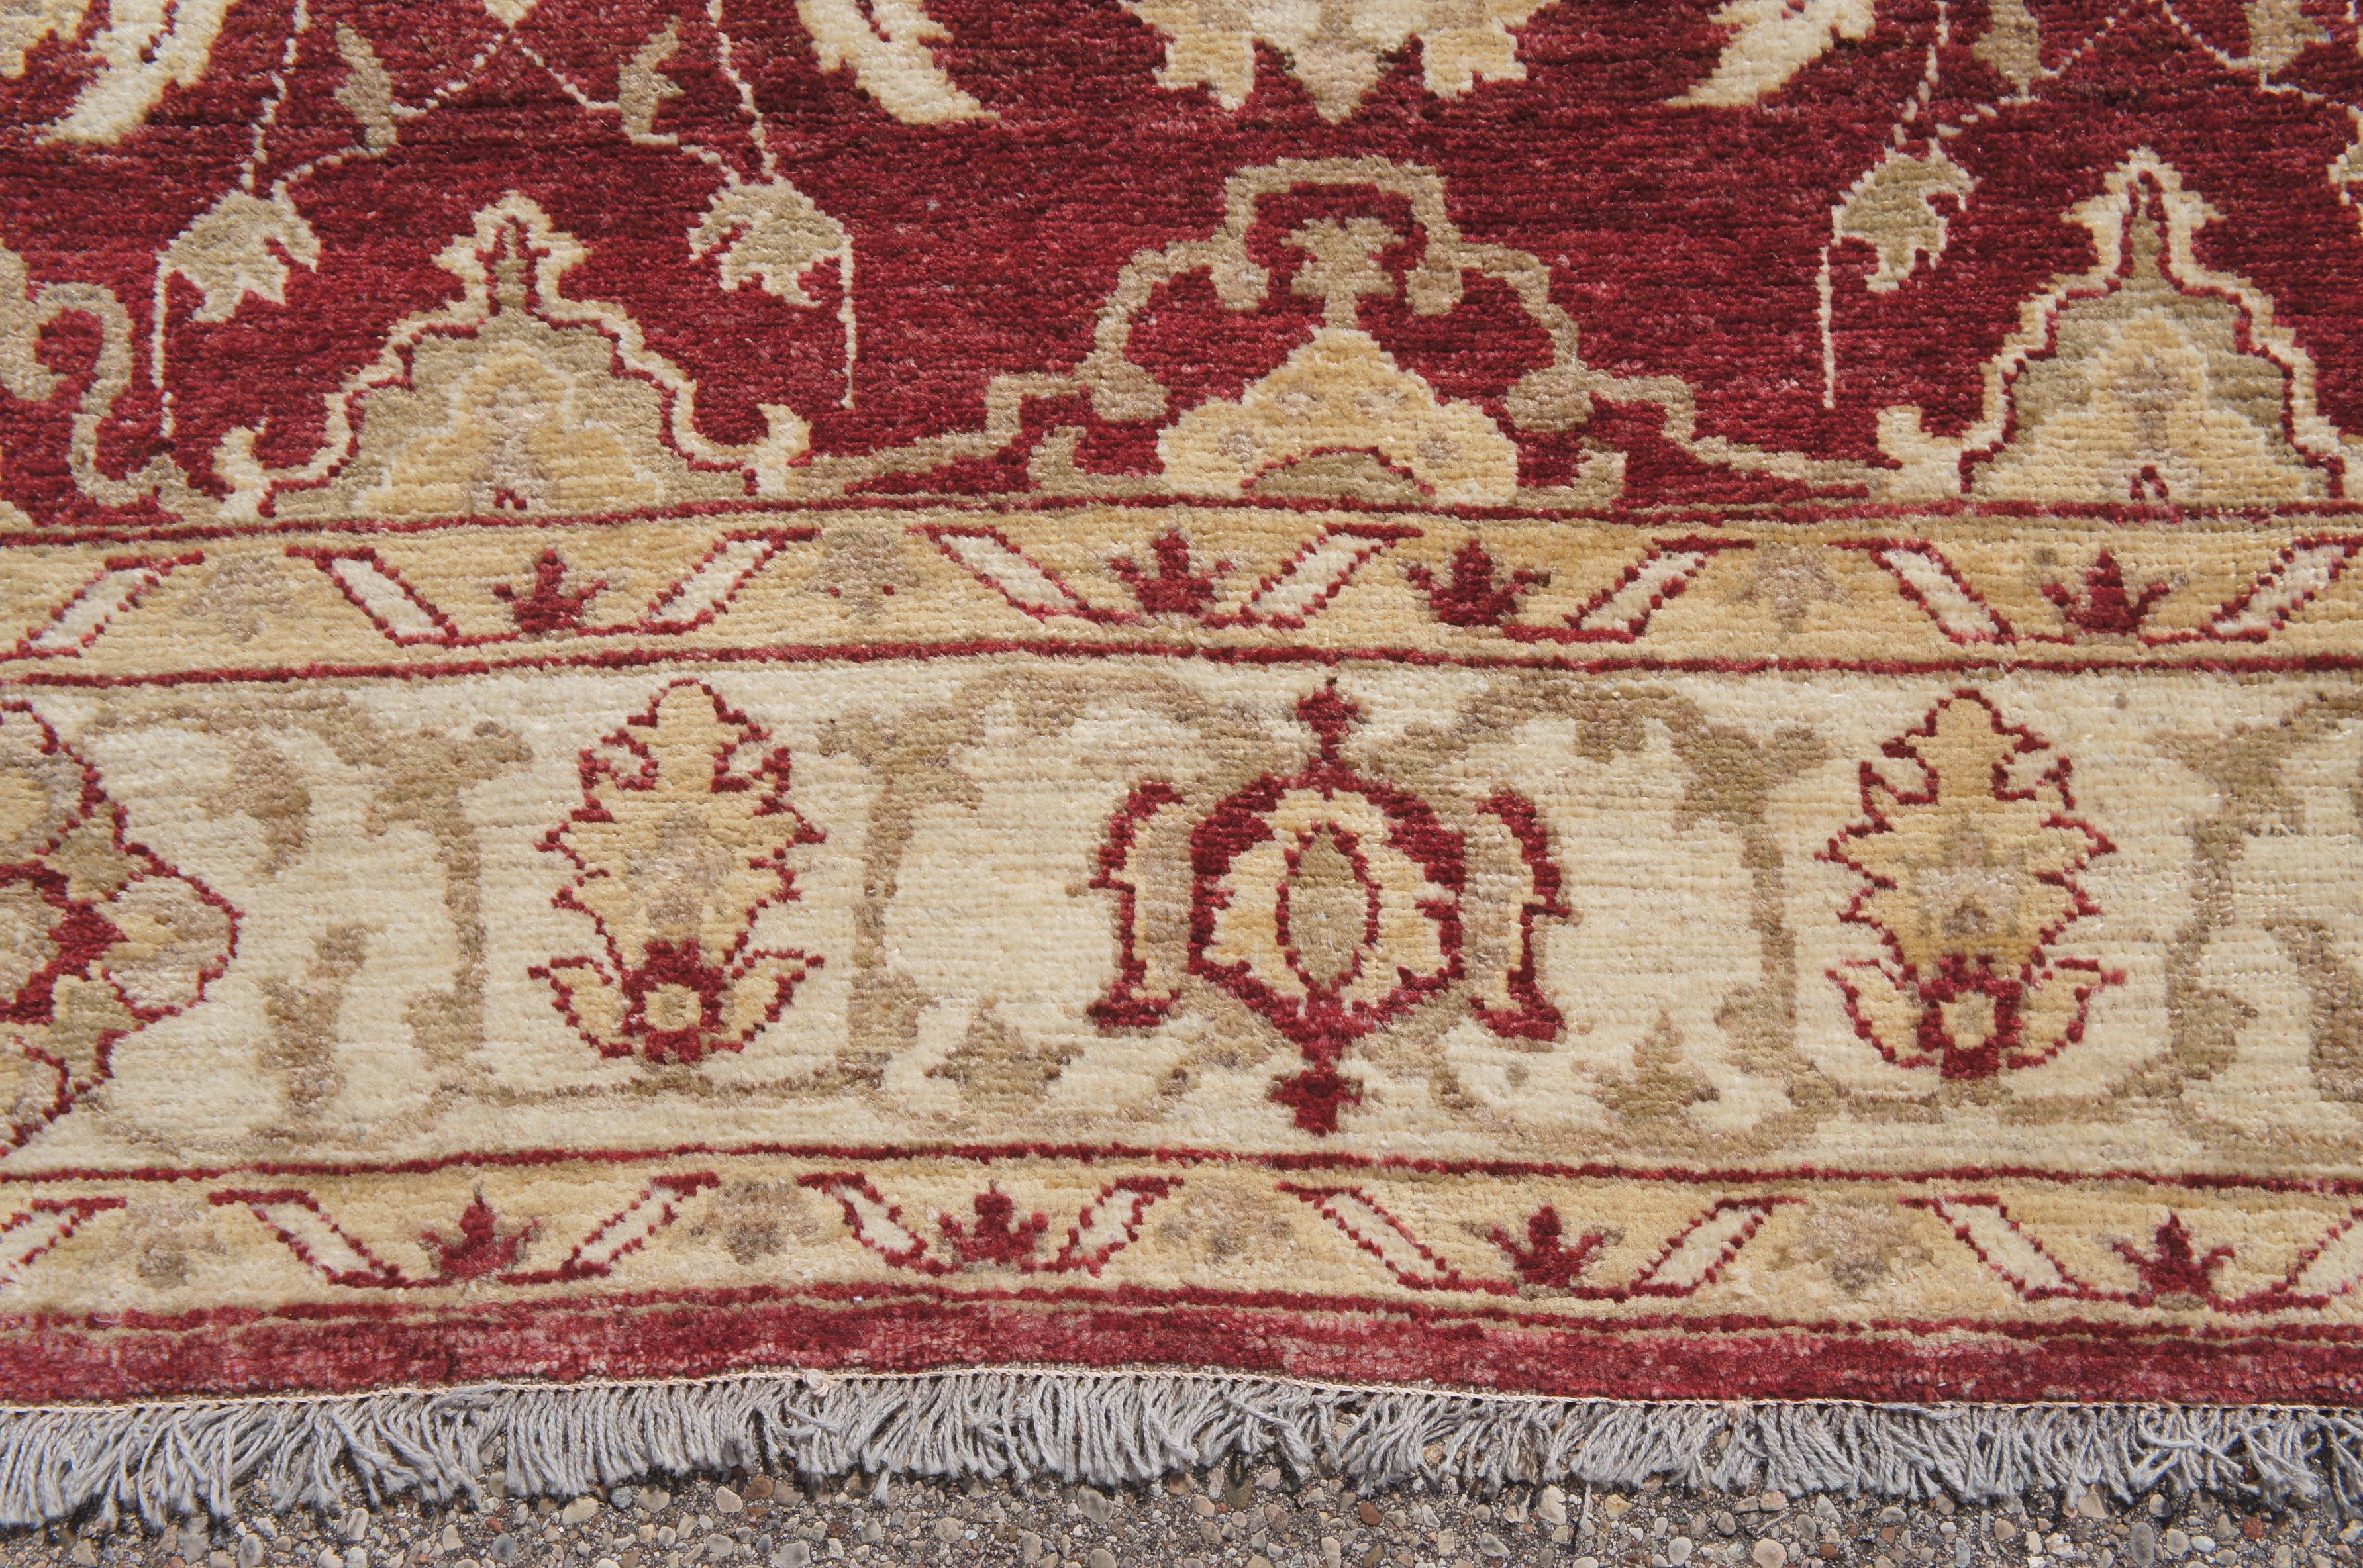 Hand Woven Turkish Red & Beige Geometric Floral Wool Carpet Area Rug 5' x 7' For Sale 1